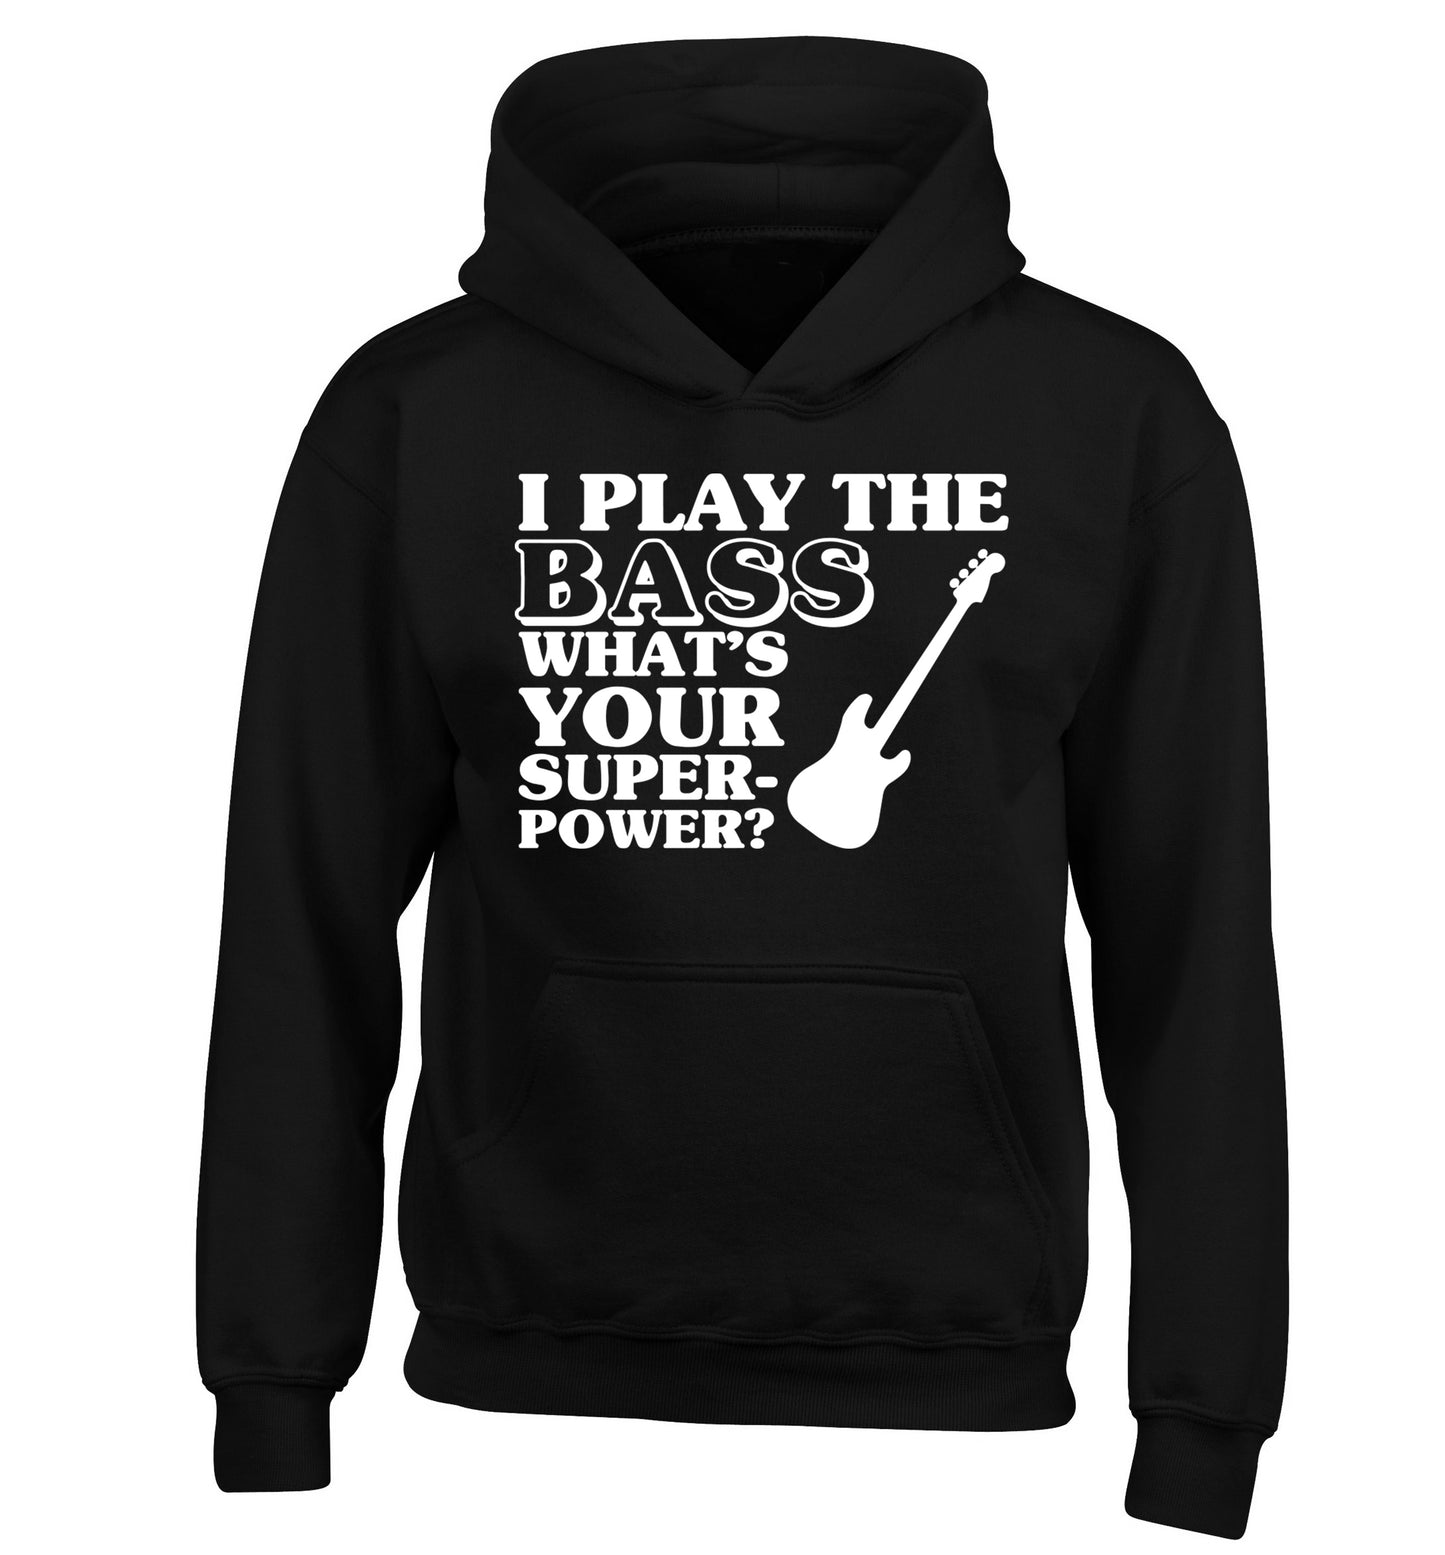 I play the bass what's your superpower? children's black hoodie 12-14 Years